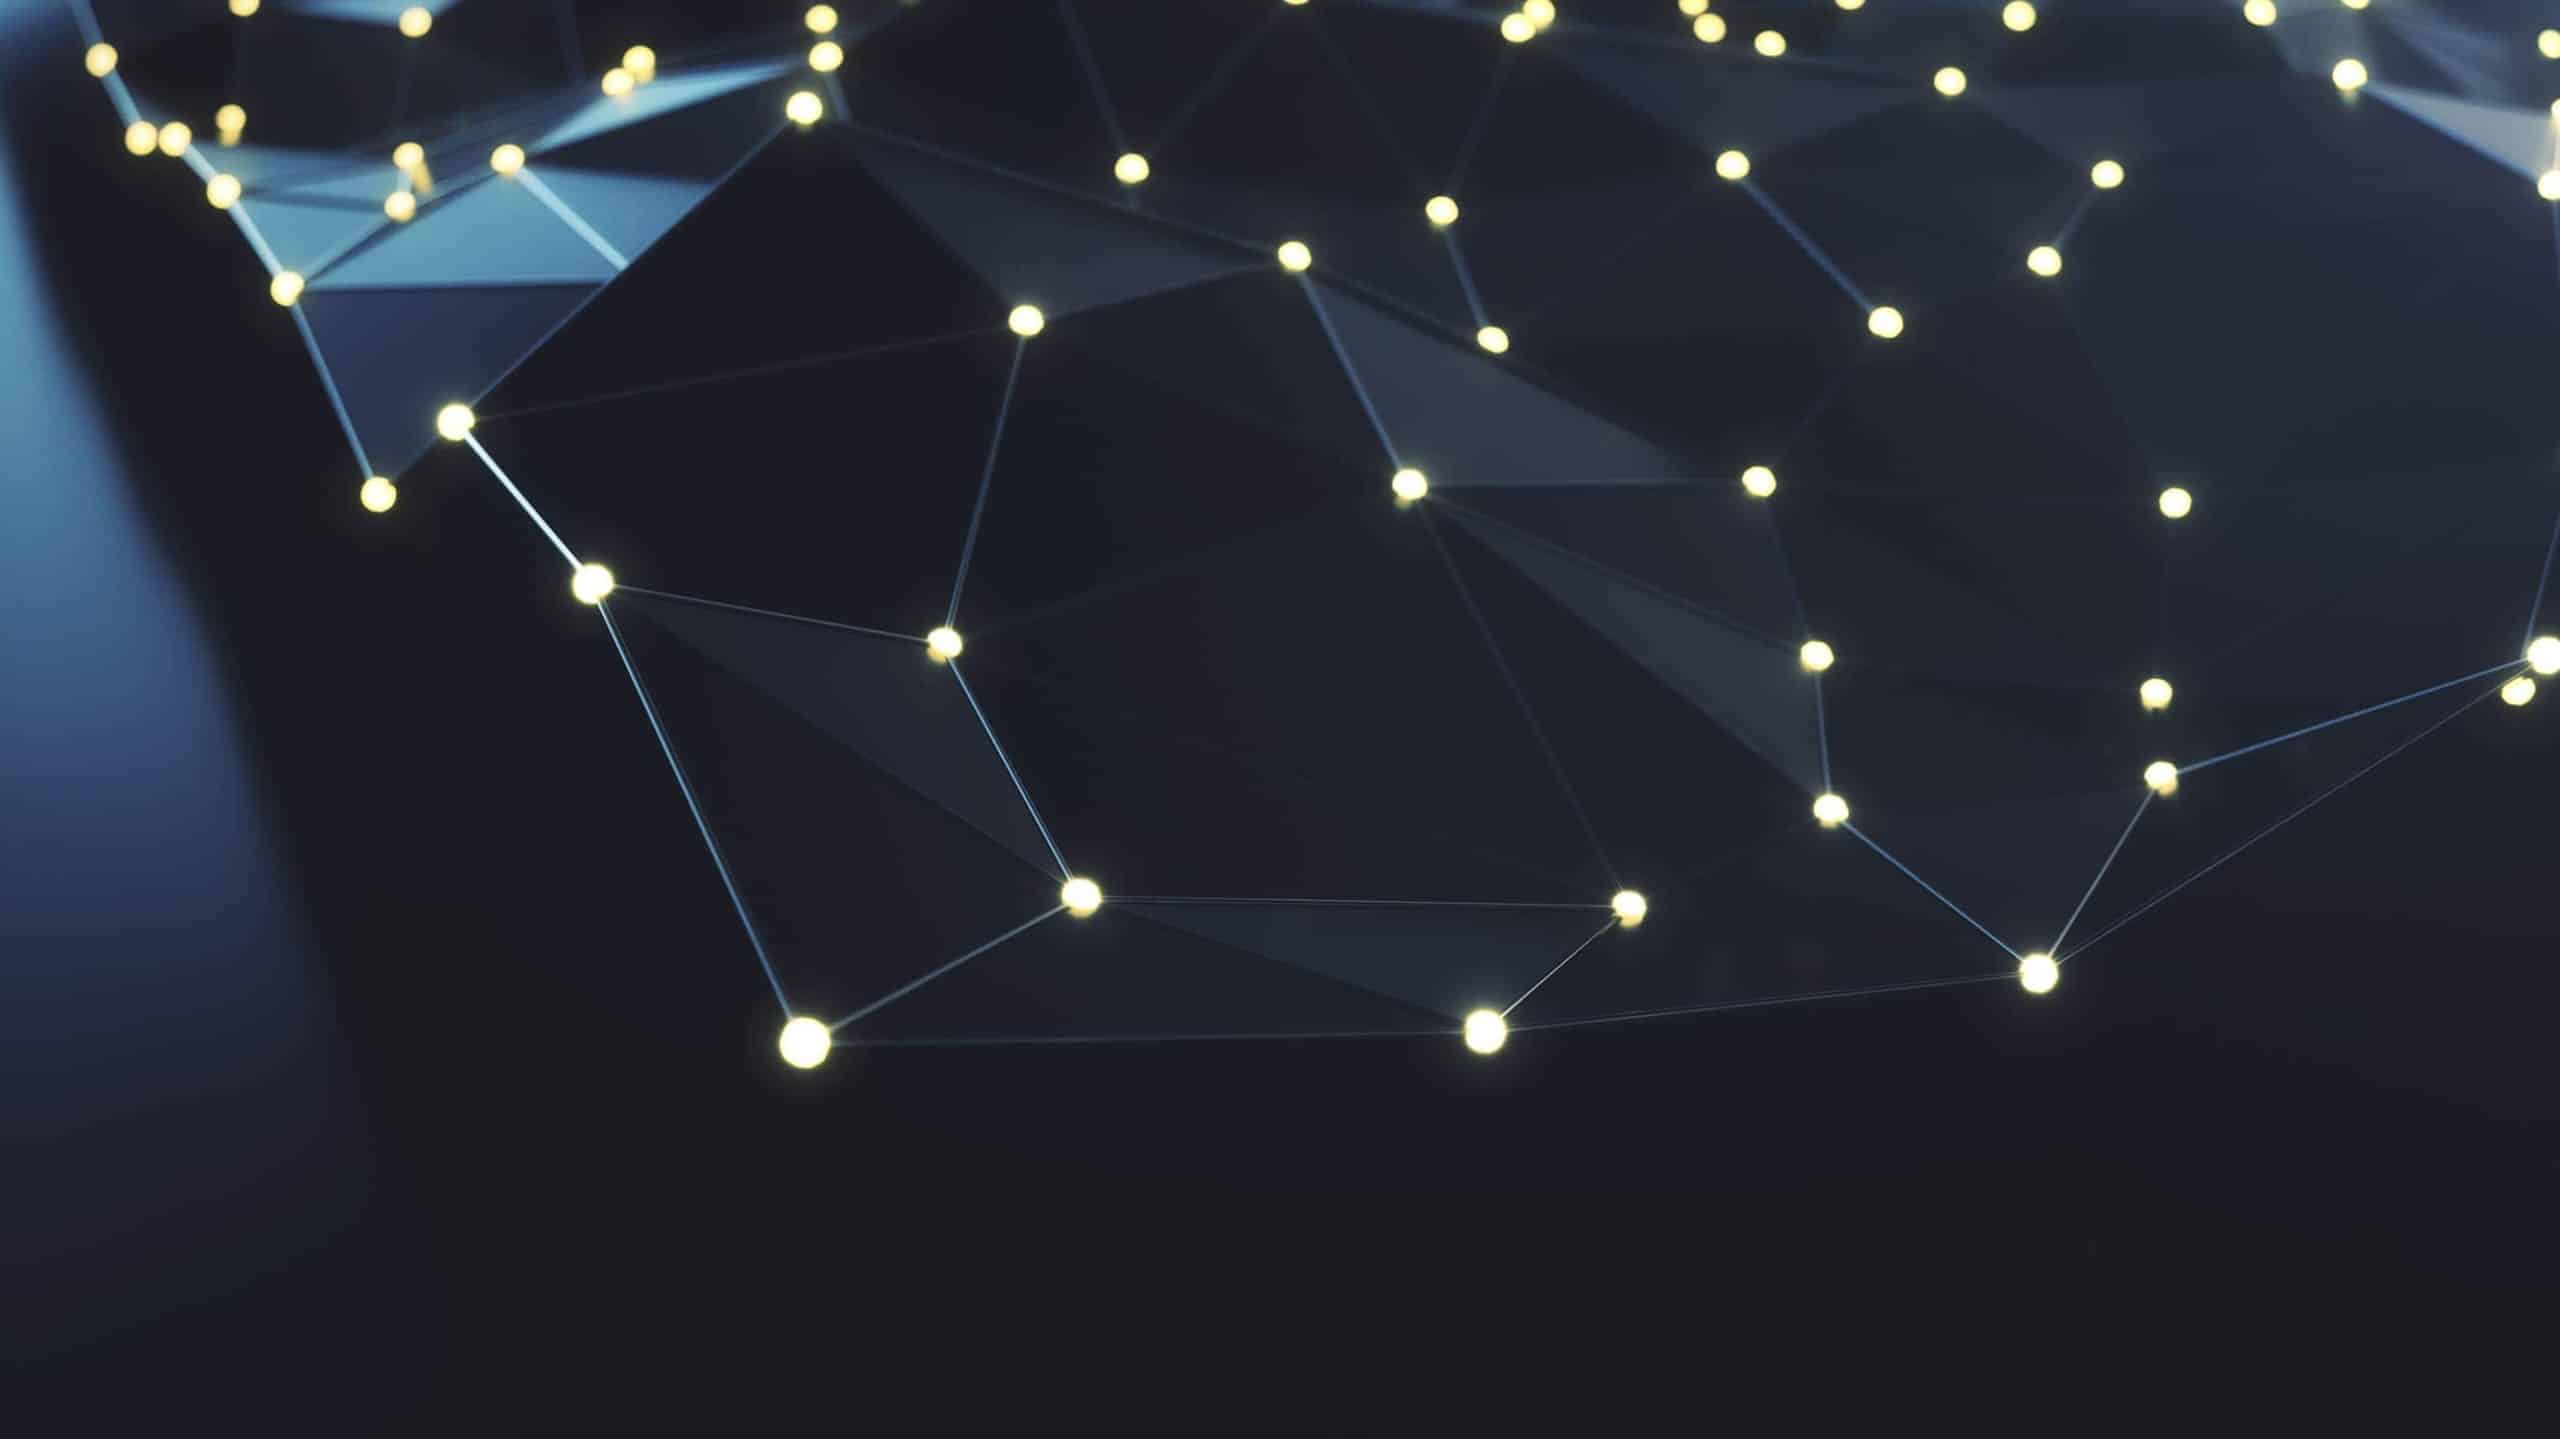 Abstract digital network connection with illuminated dots connected by lines on a dark background, representing a concept of technology, internet, or data communication.